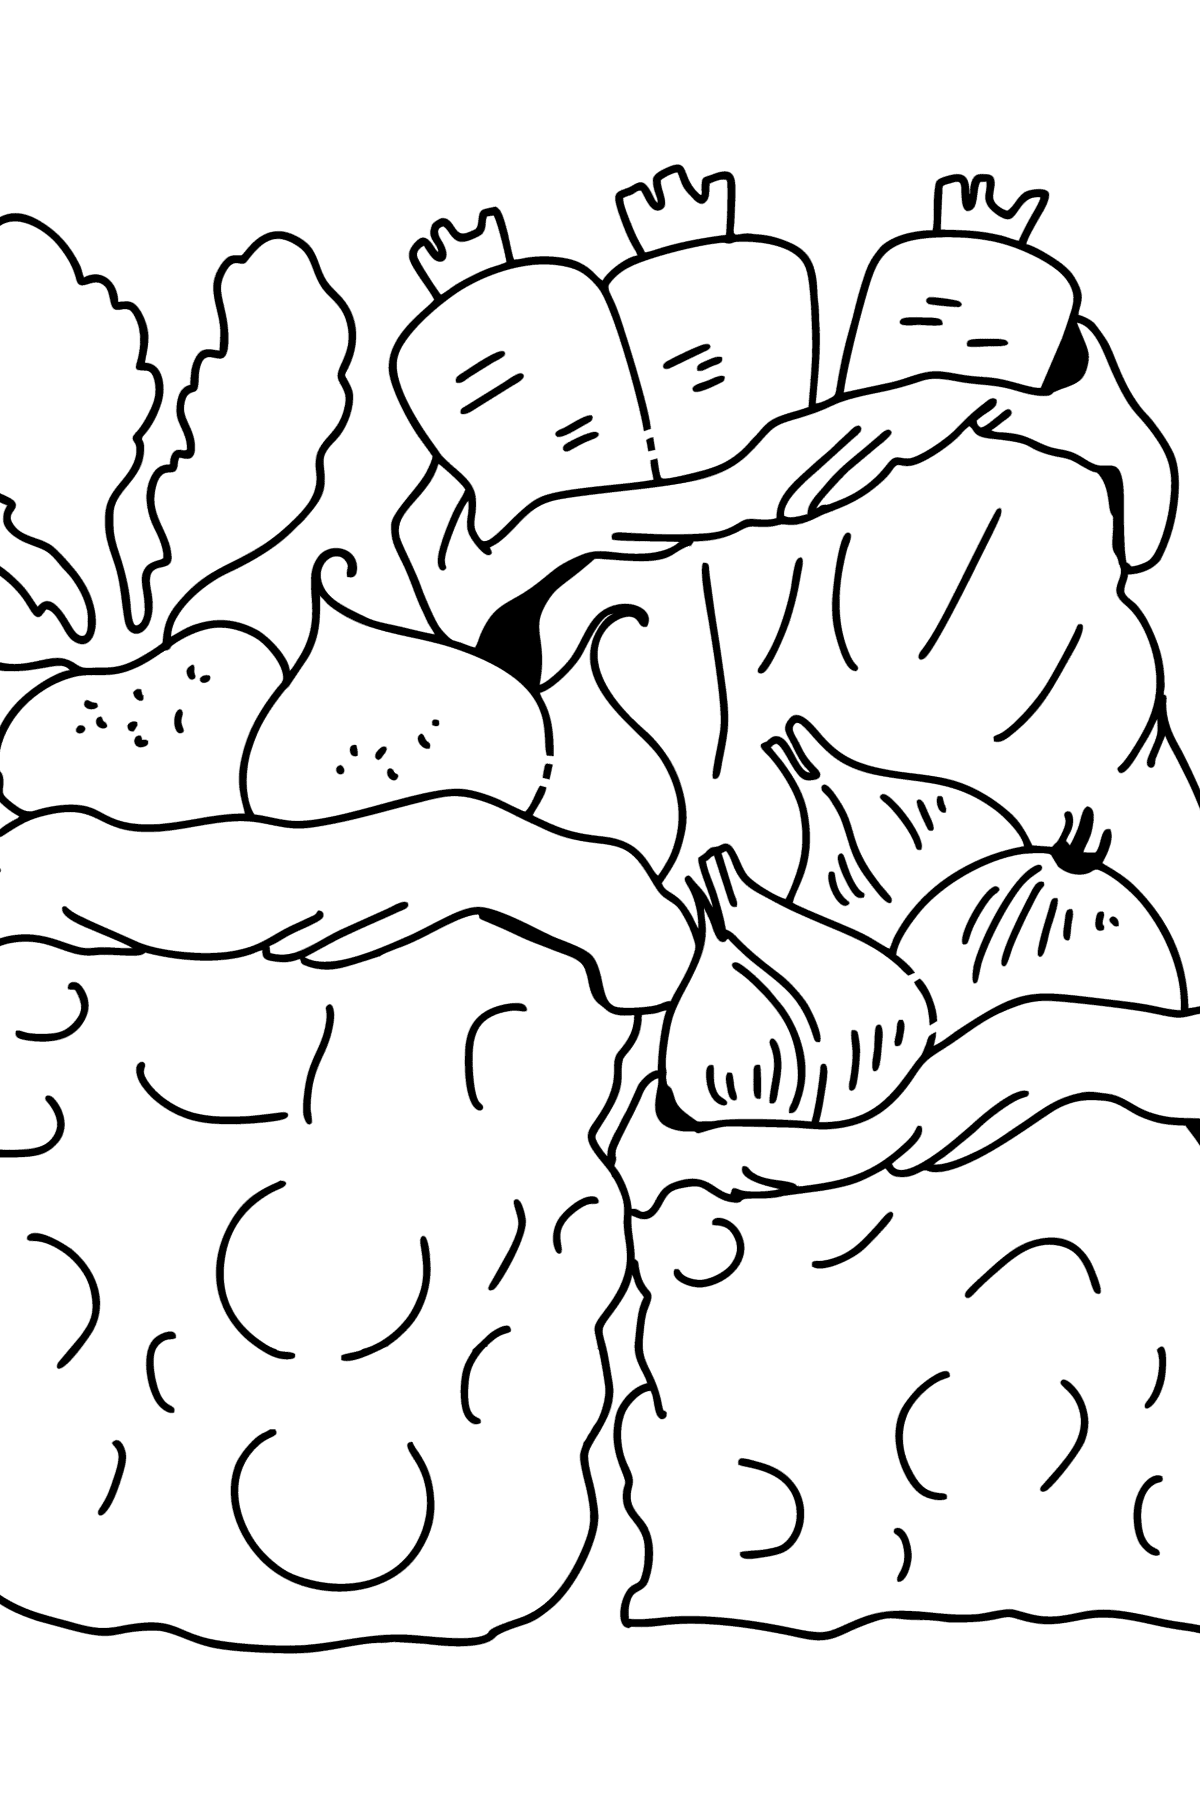 Harvest coloring page - Coloring Pages for Kids